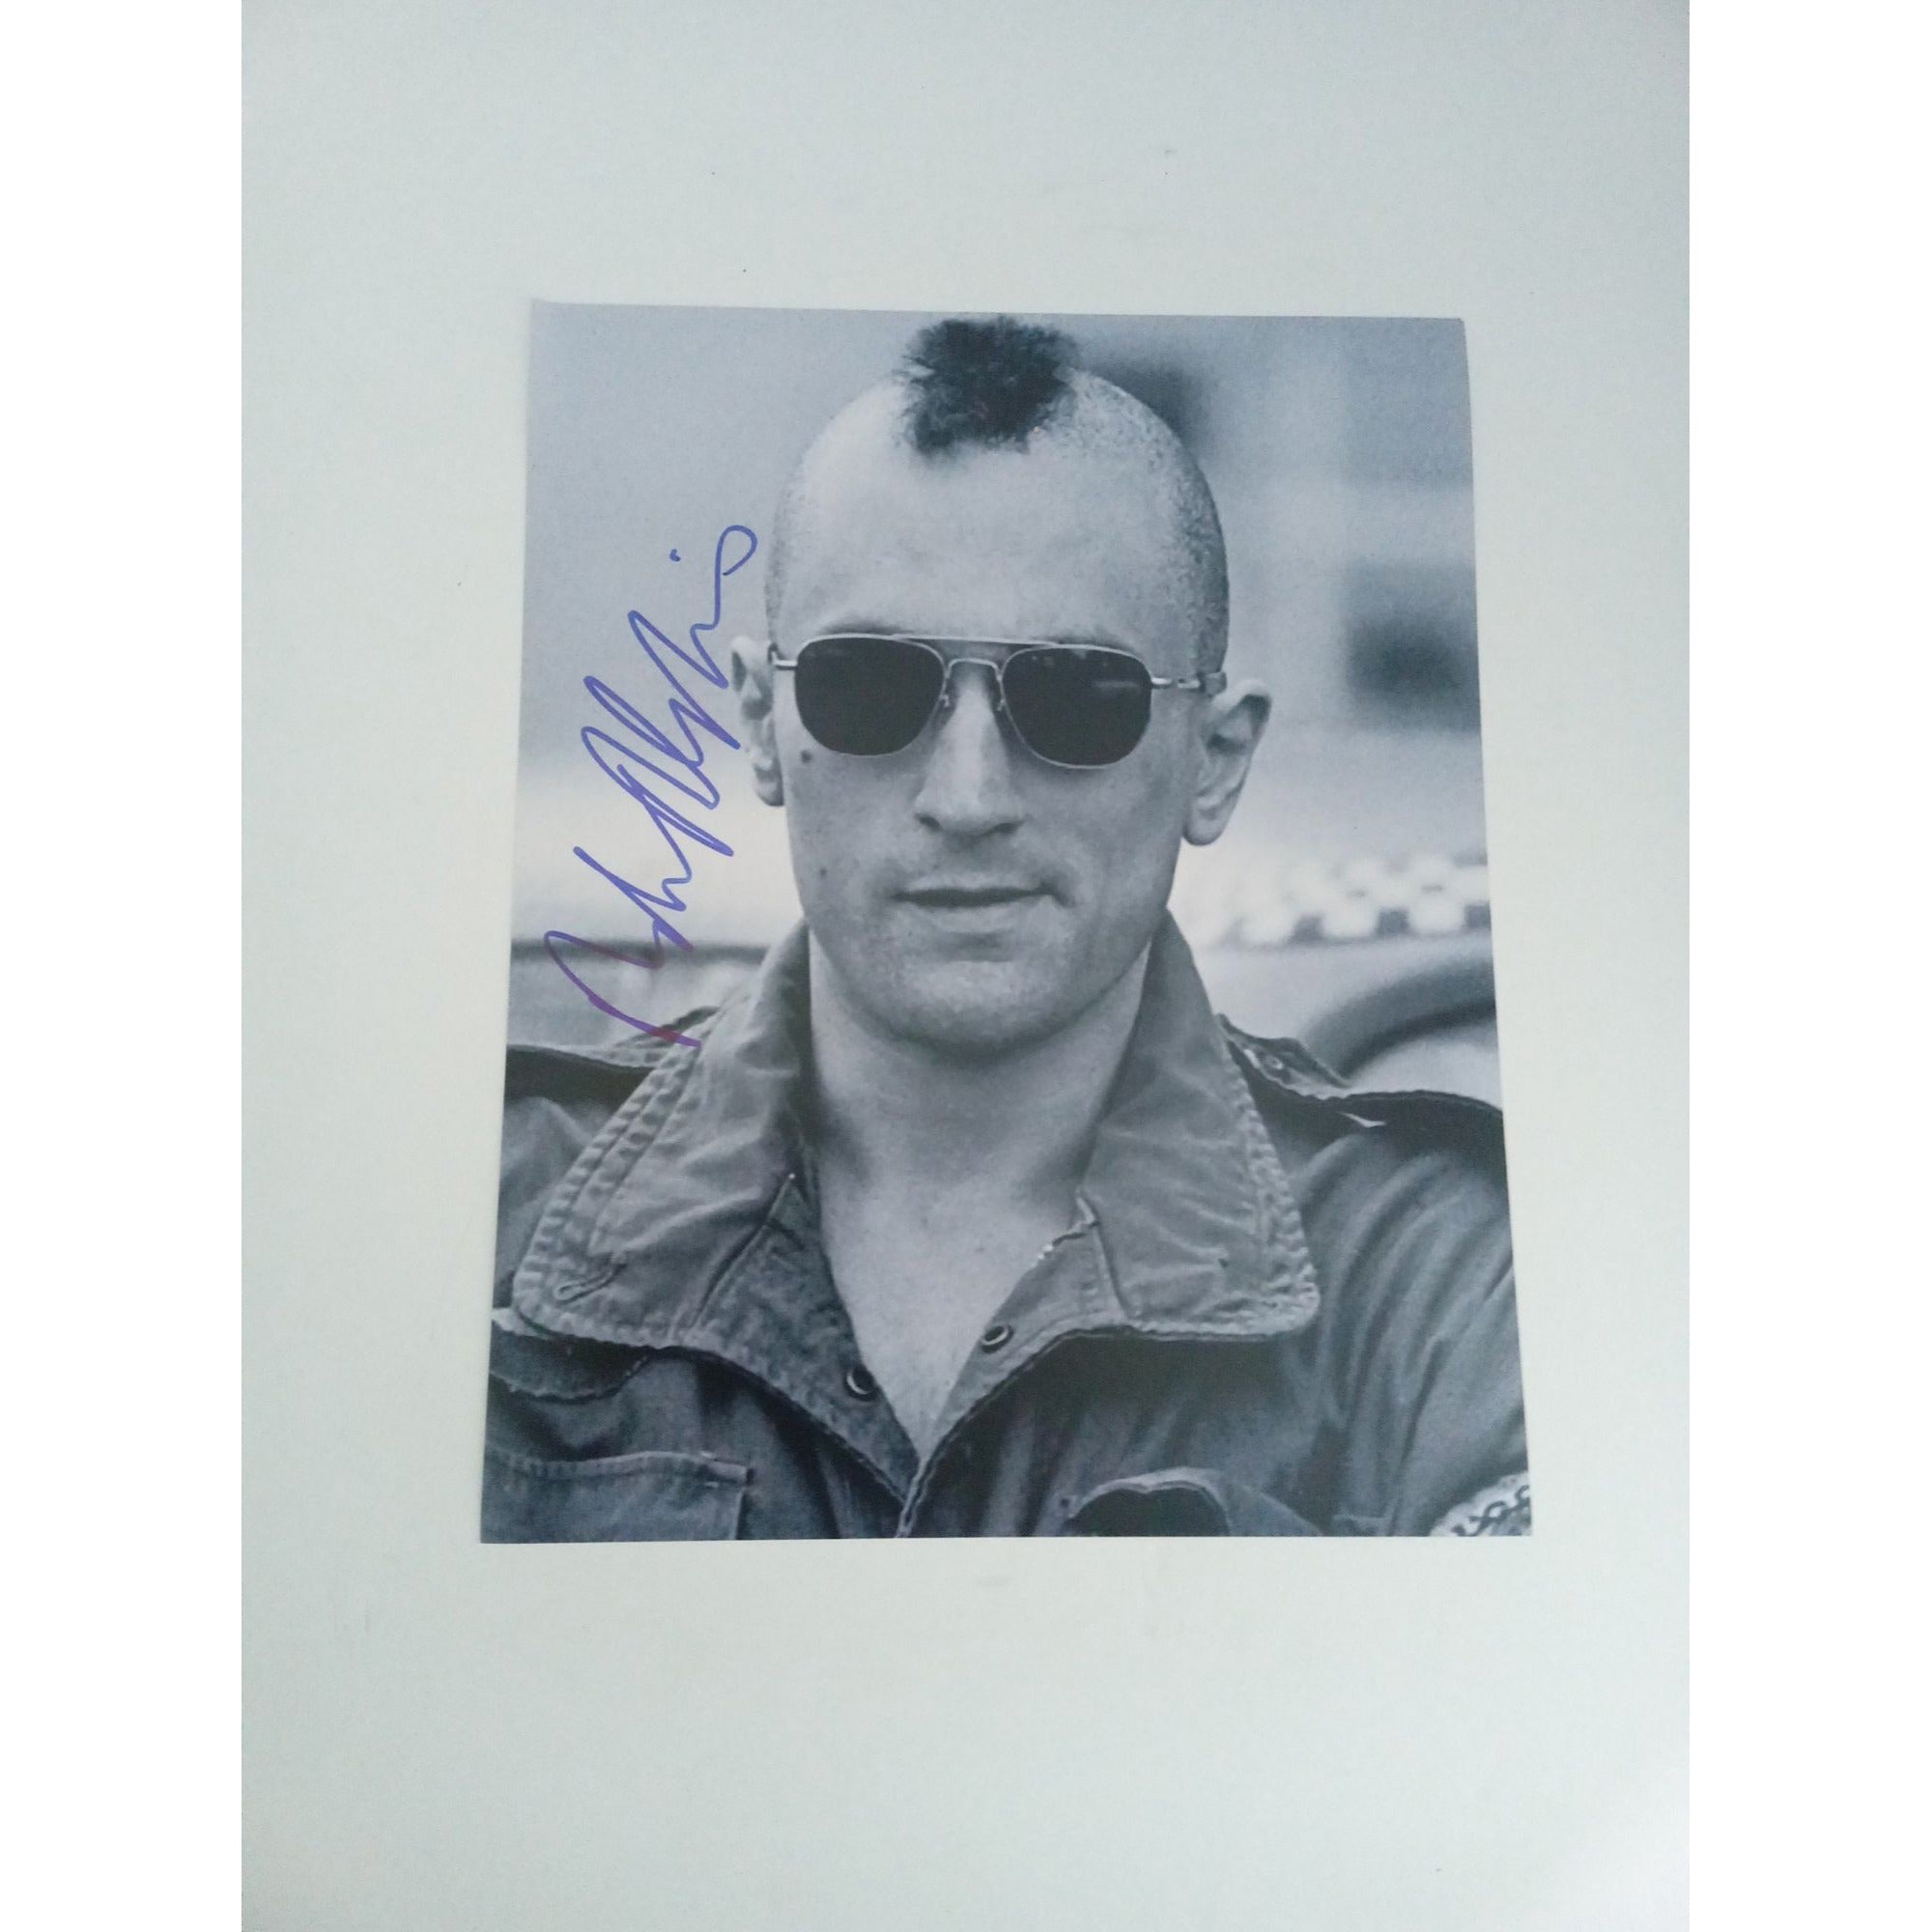 Robert De Niro Taxi Driver signed photo with proof